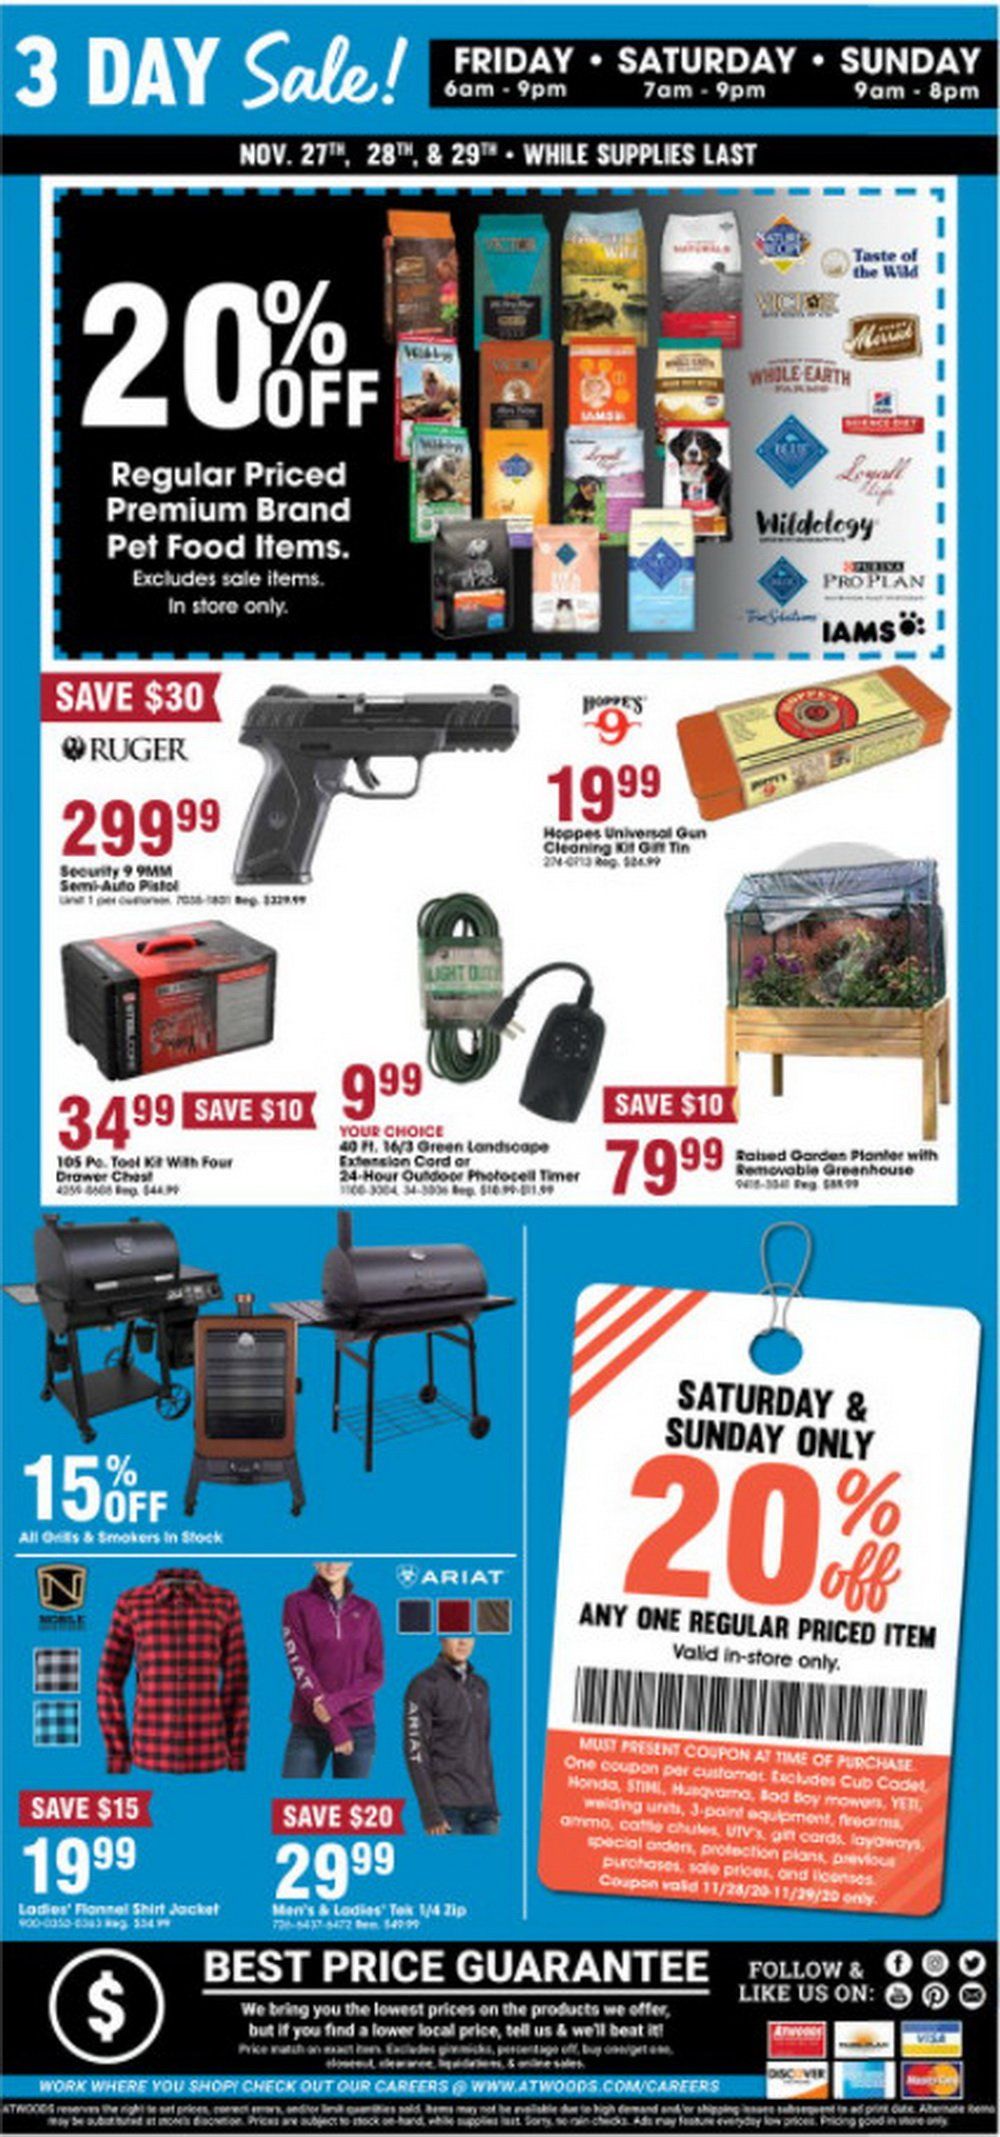 Atwoods Black Friday Ad Nov 27 – Nov 29, 2020 - What Stores Have Their Black Friday Ad Out